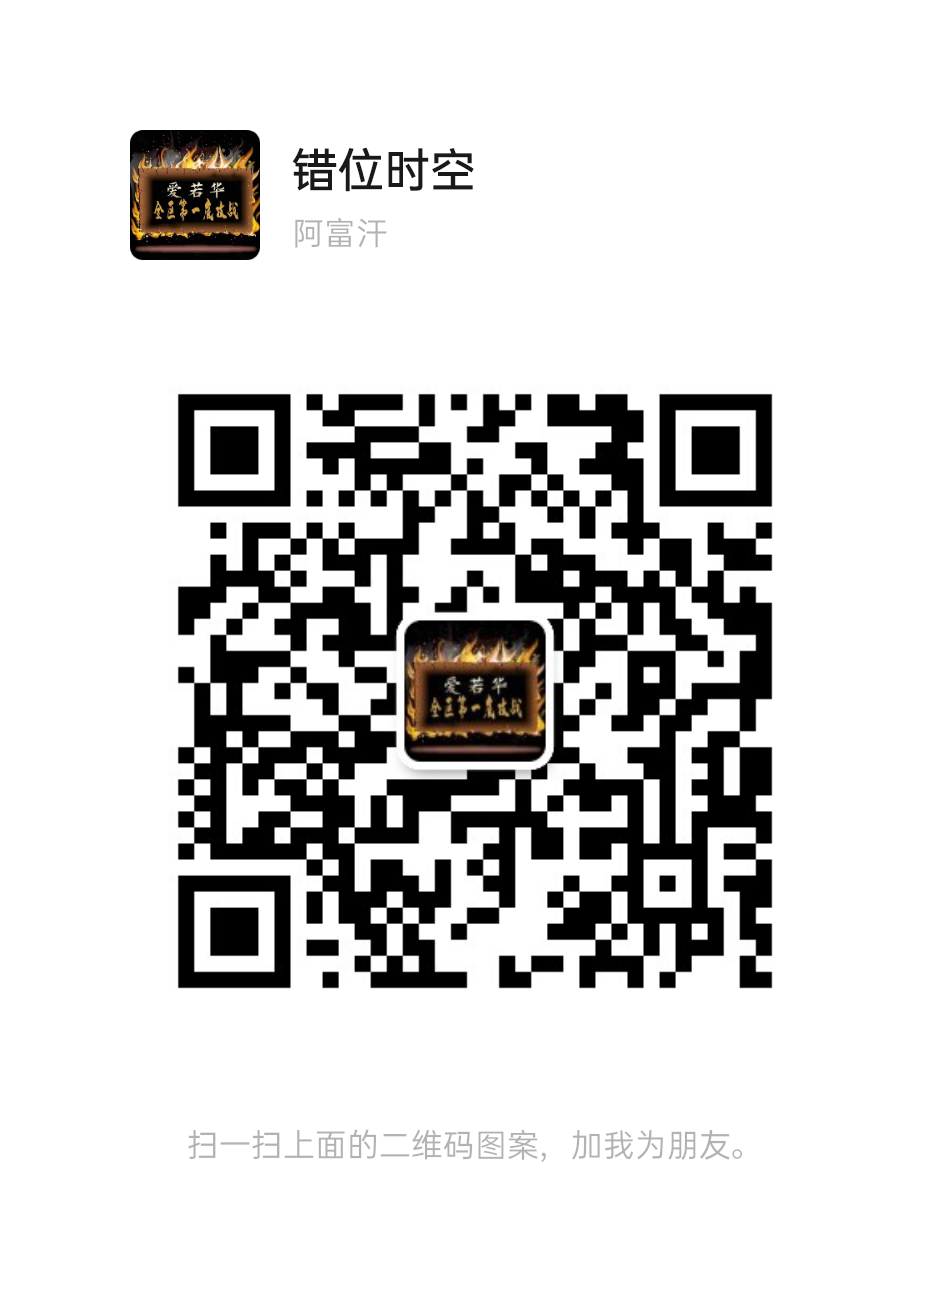 mmqrcode1679974711508.png